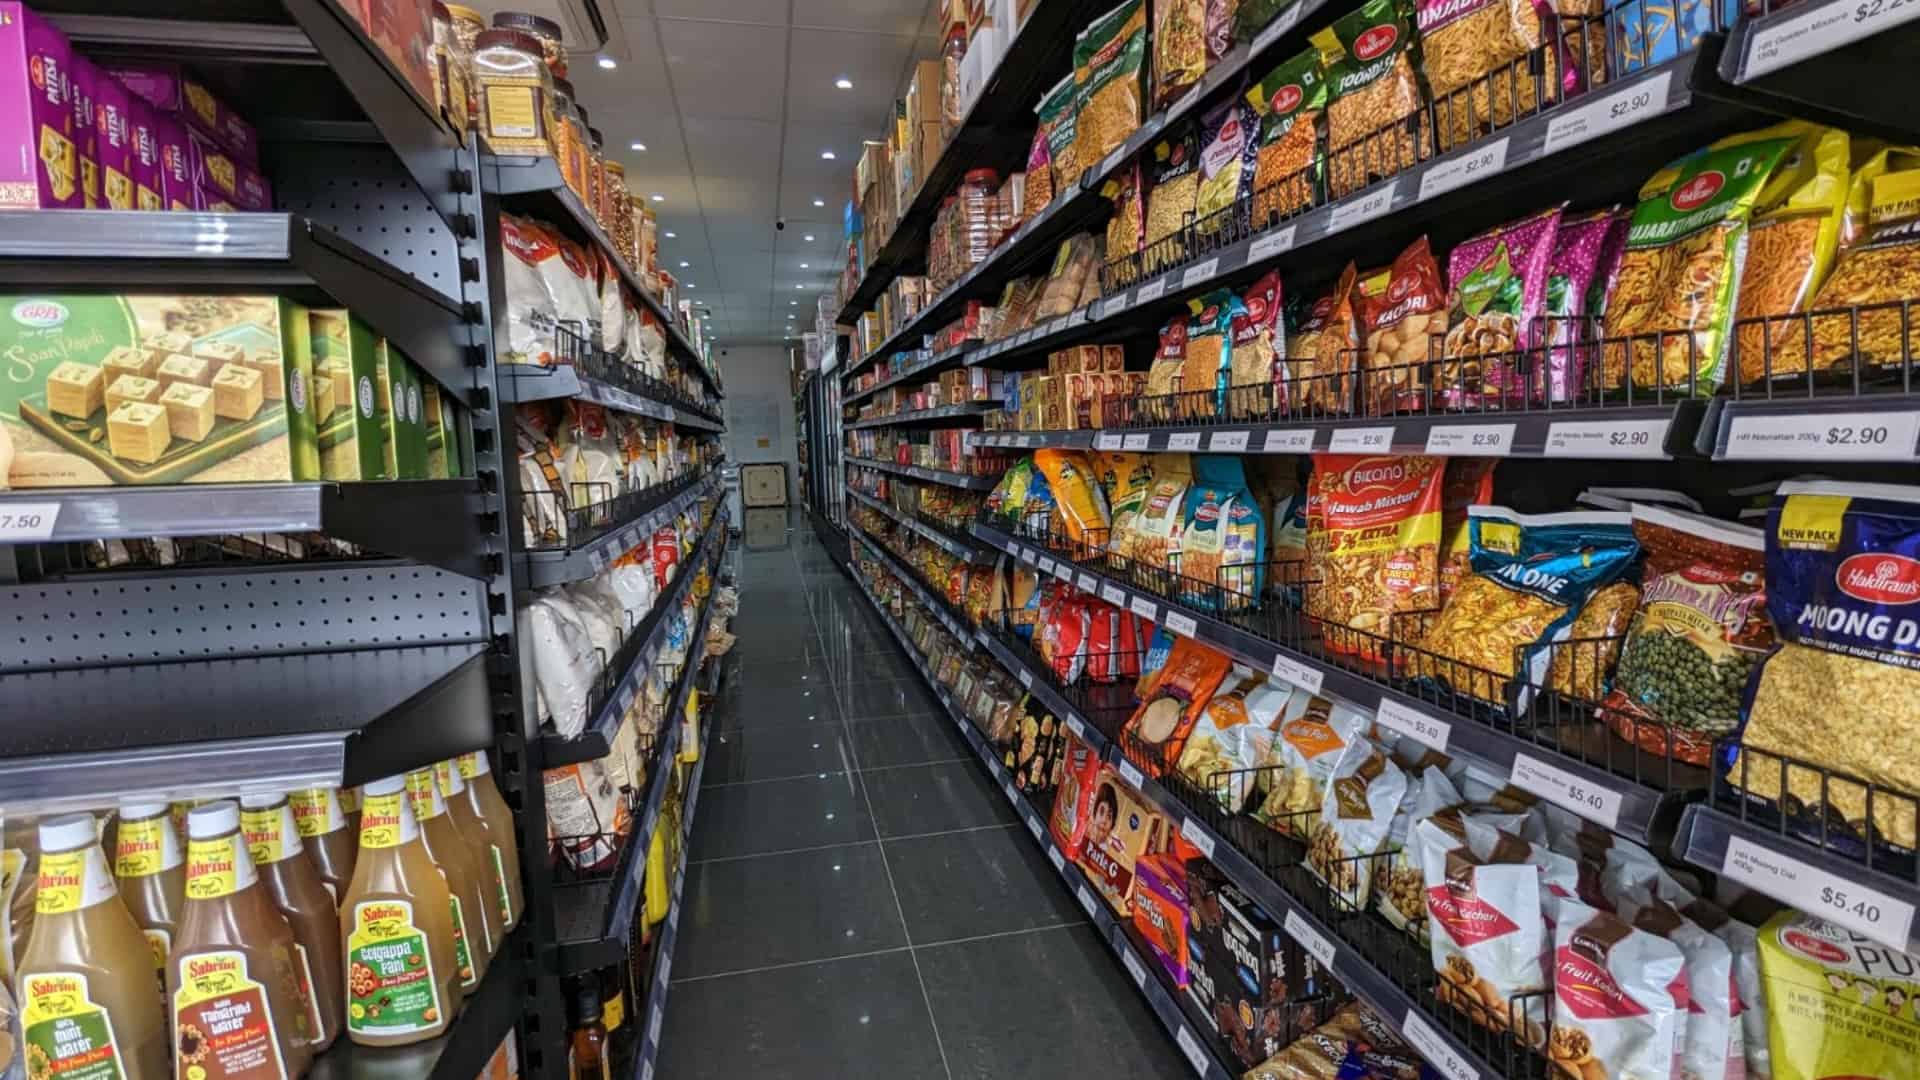 the spice house indian supermarket aisle